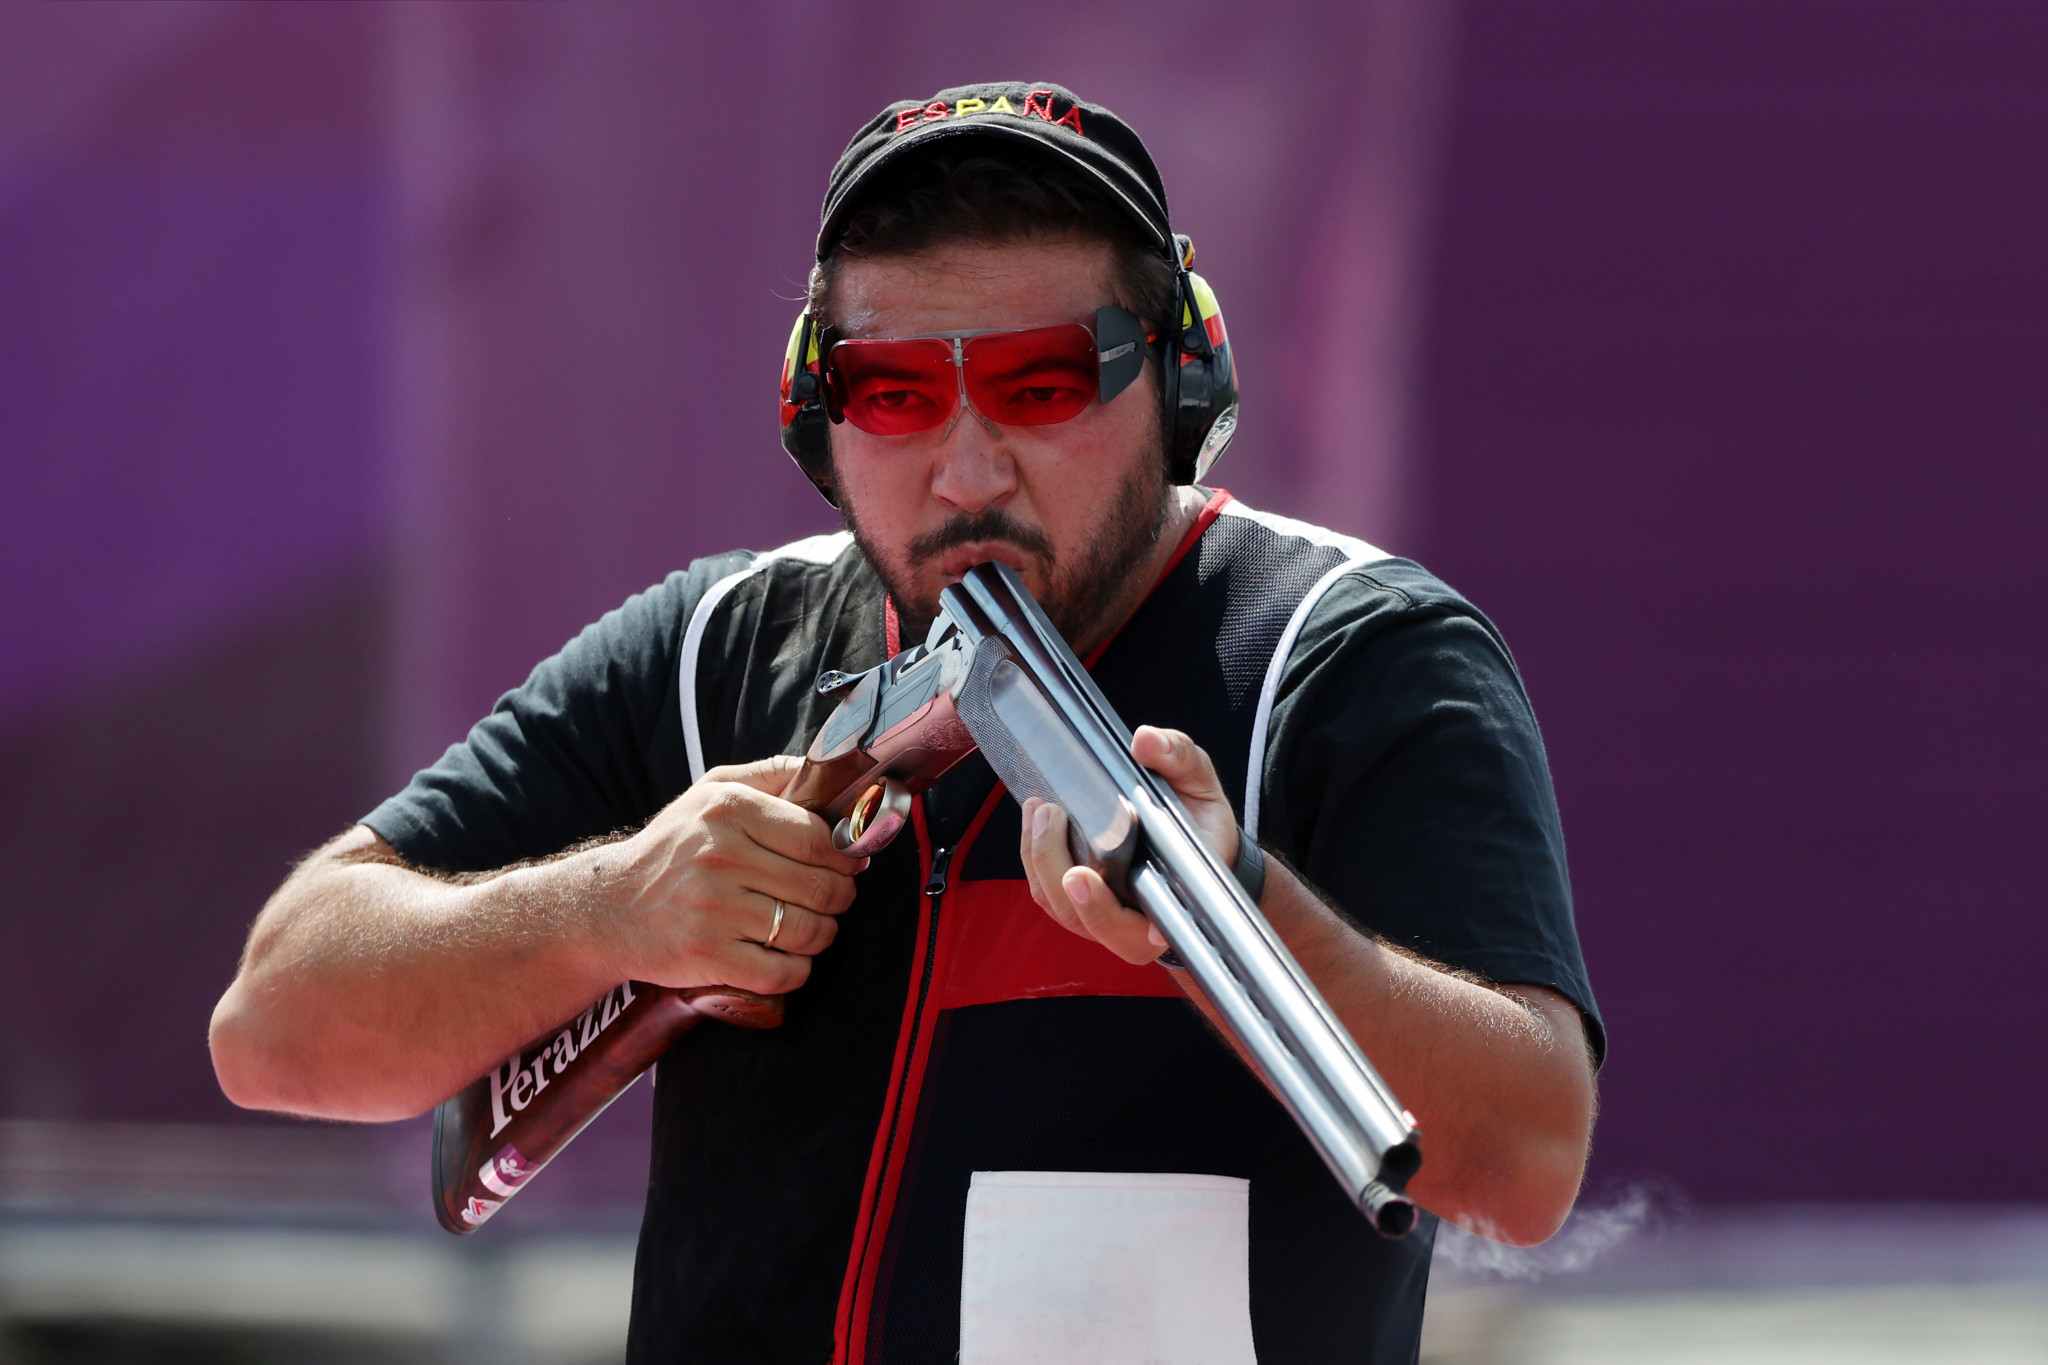 Tokyo 2020 shooting gold medallist Alberto Fernandez is one of five athlete ambassadors for a Spanish Olympic Committee project ©Getty Images